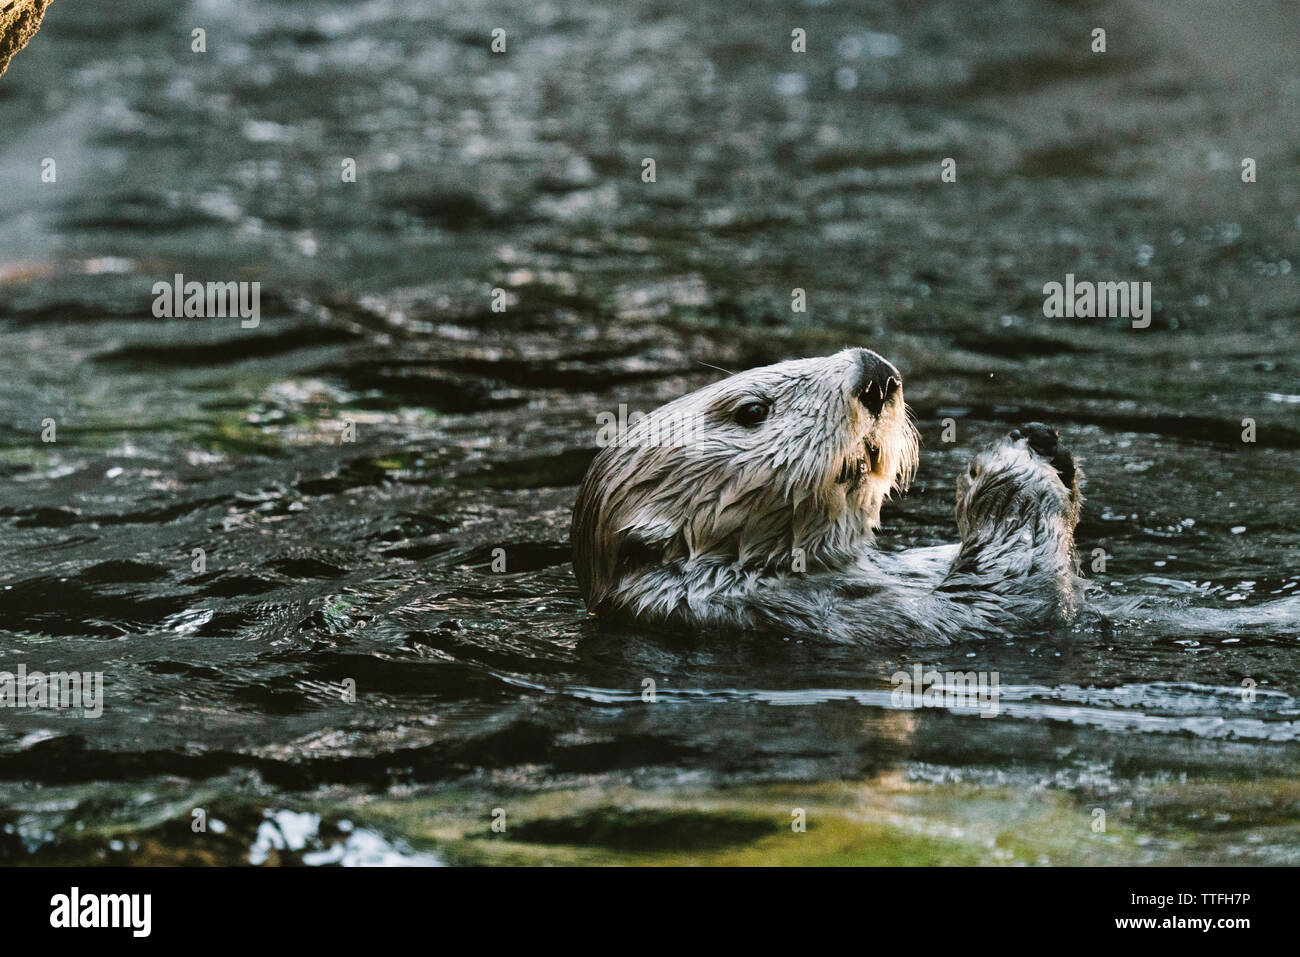 Side view of a Sea Otter swimming in an aquarium Stock Photo